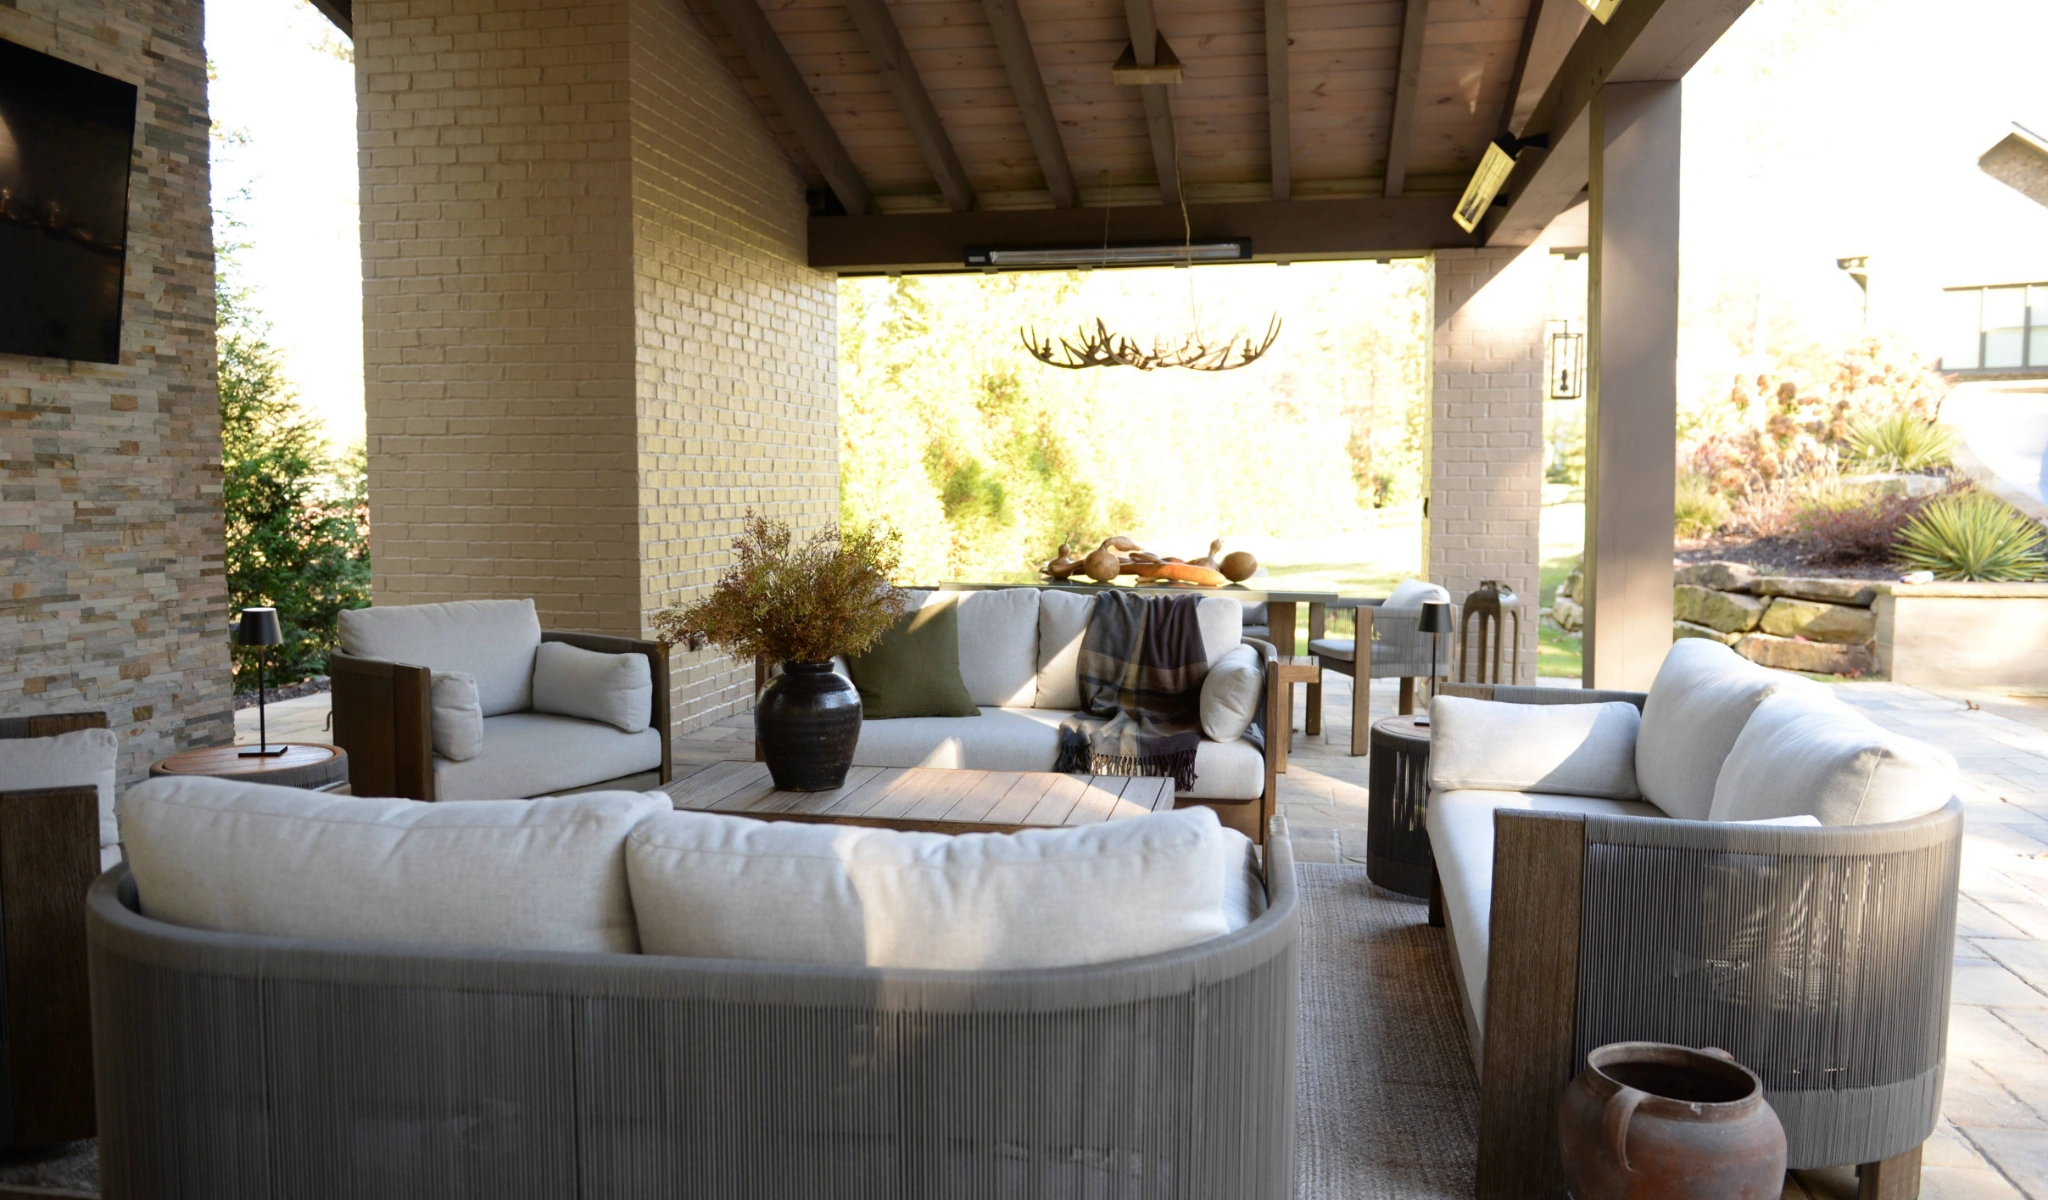 An outdoor living area with furniture and a TV.